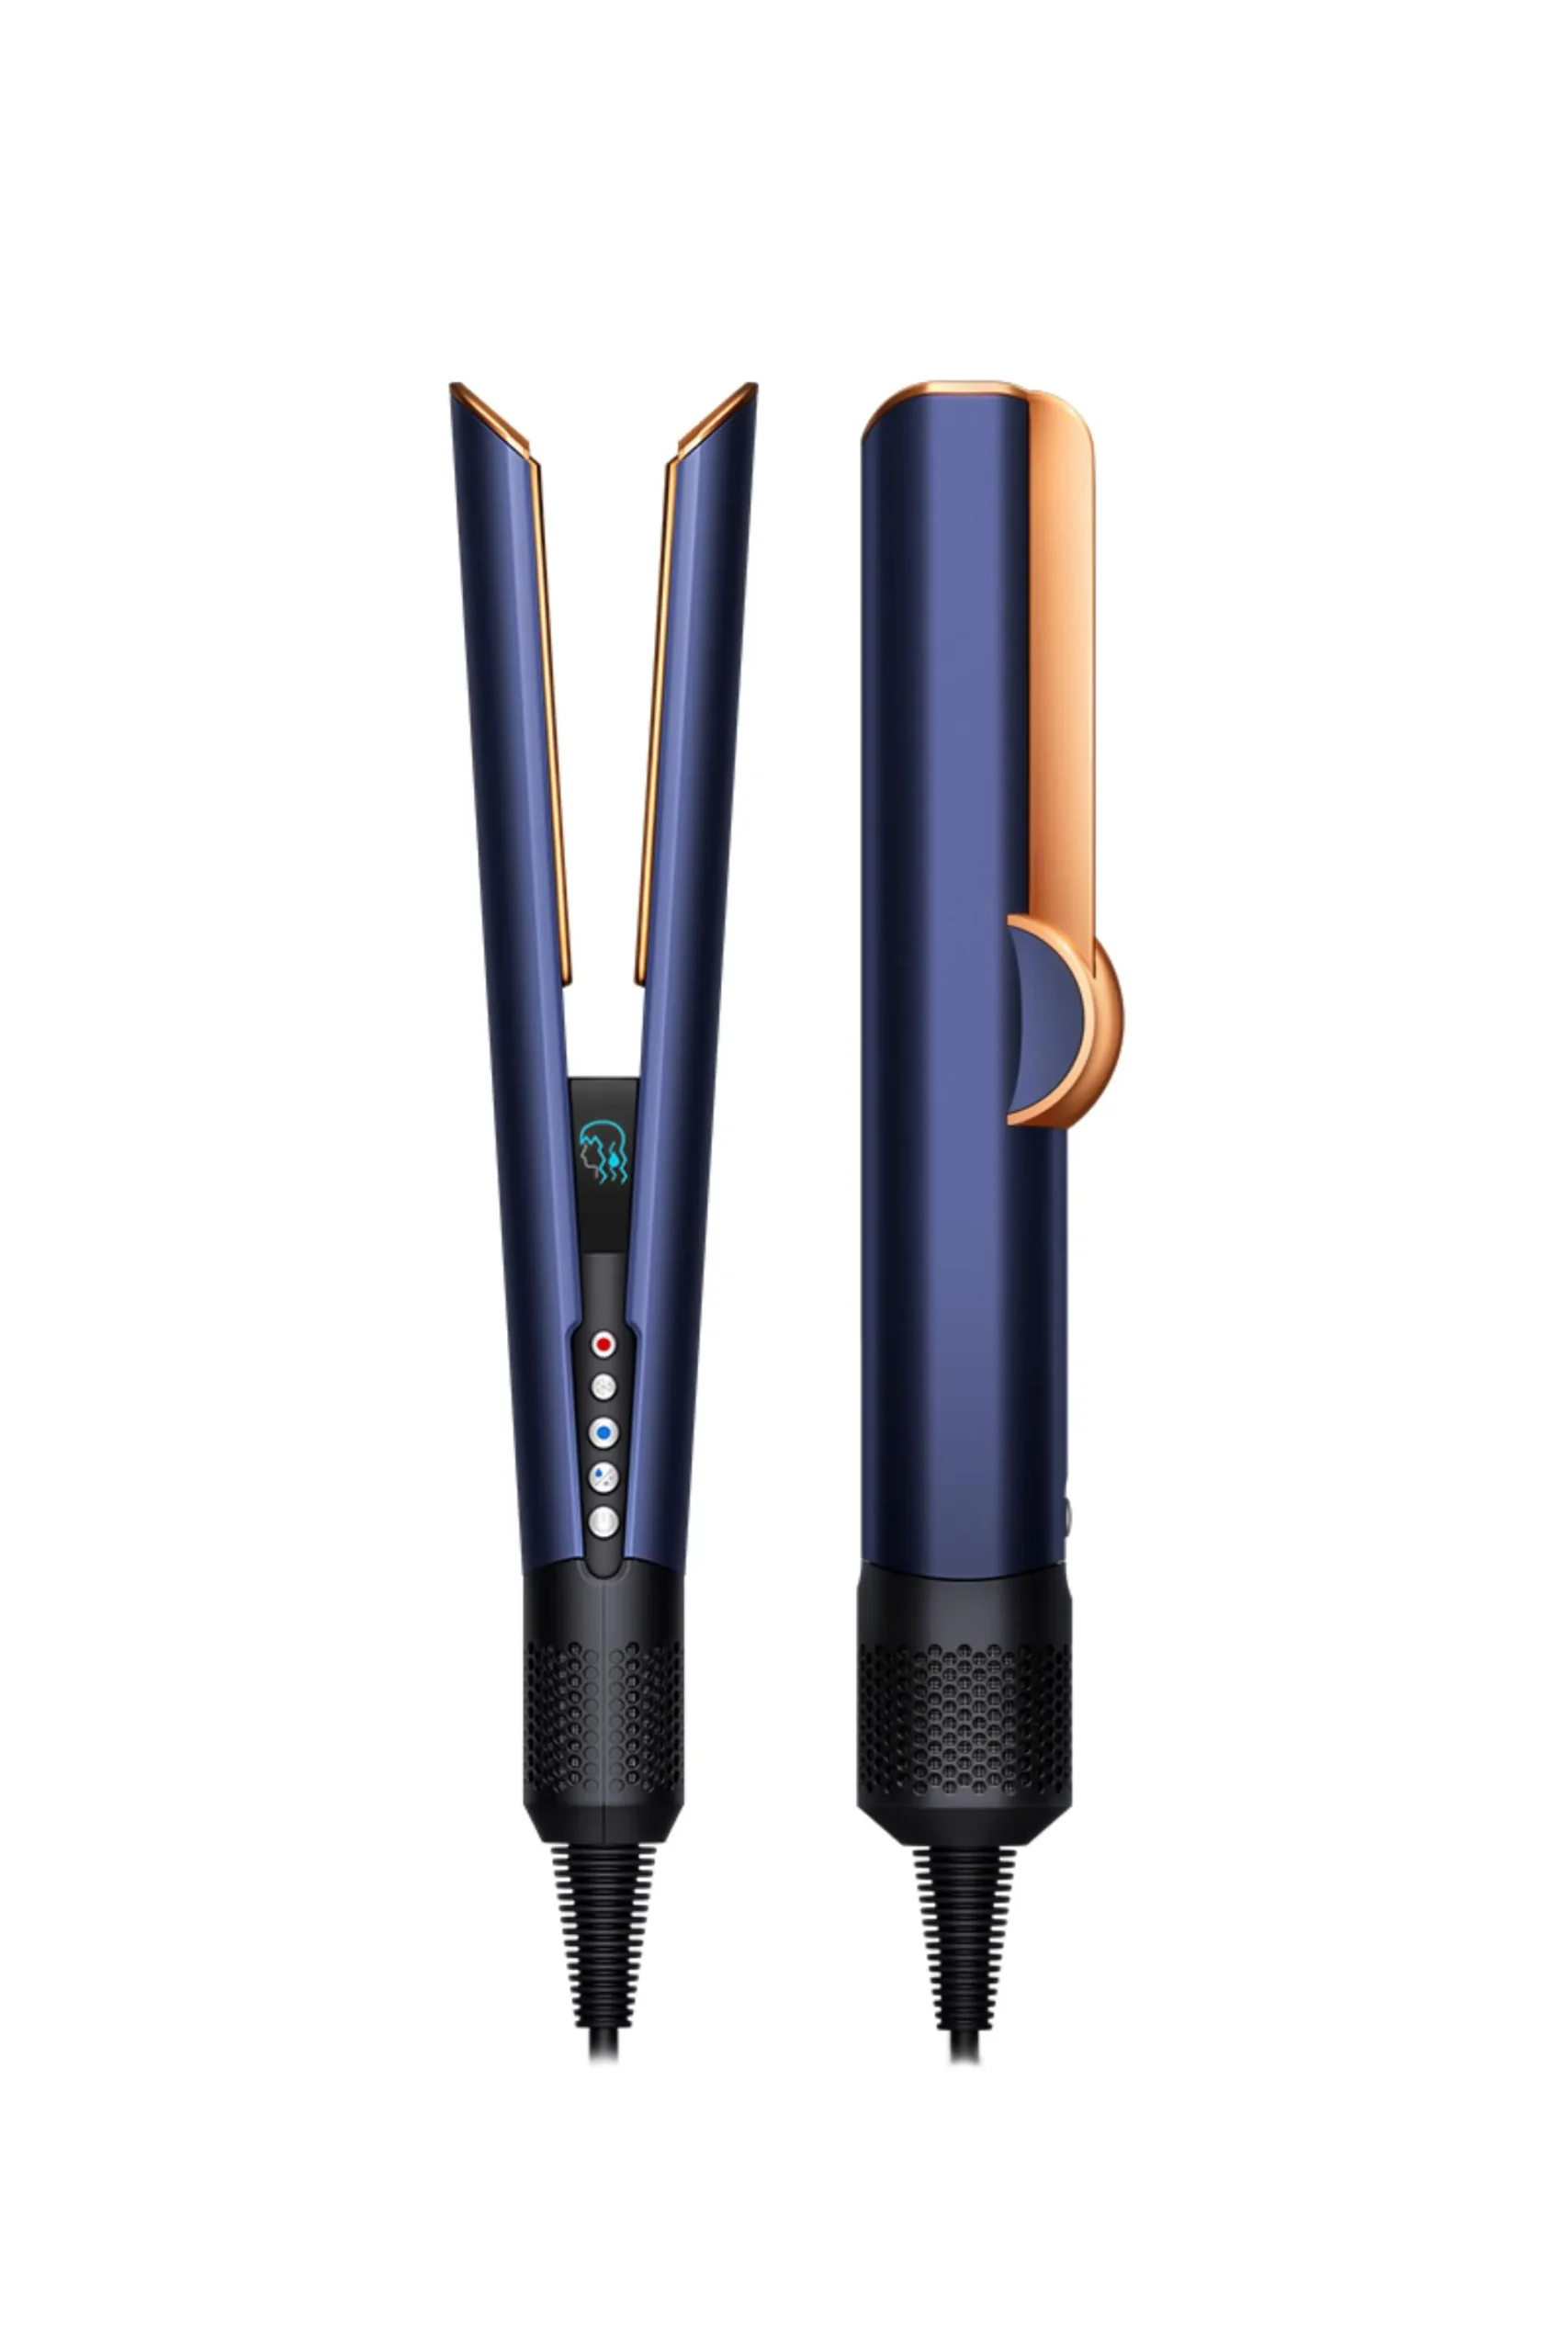 Two hair styling tools, a flat iron and a curling wand, in blue and gold, isolated on a white background.